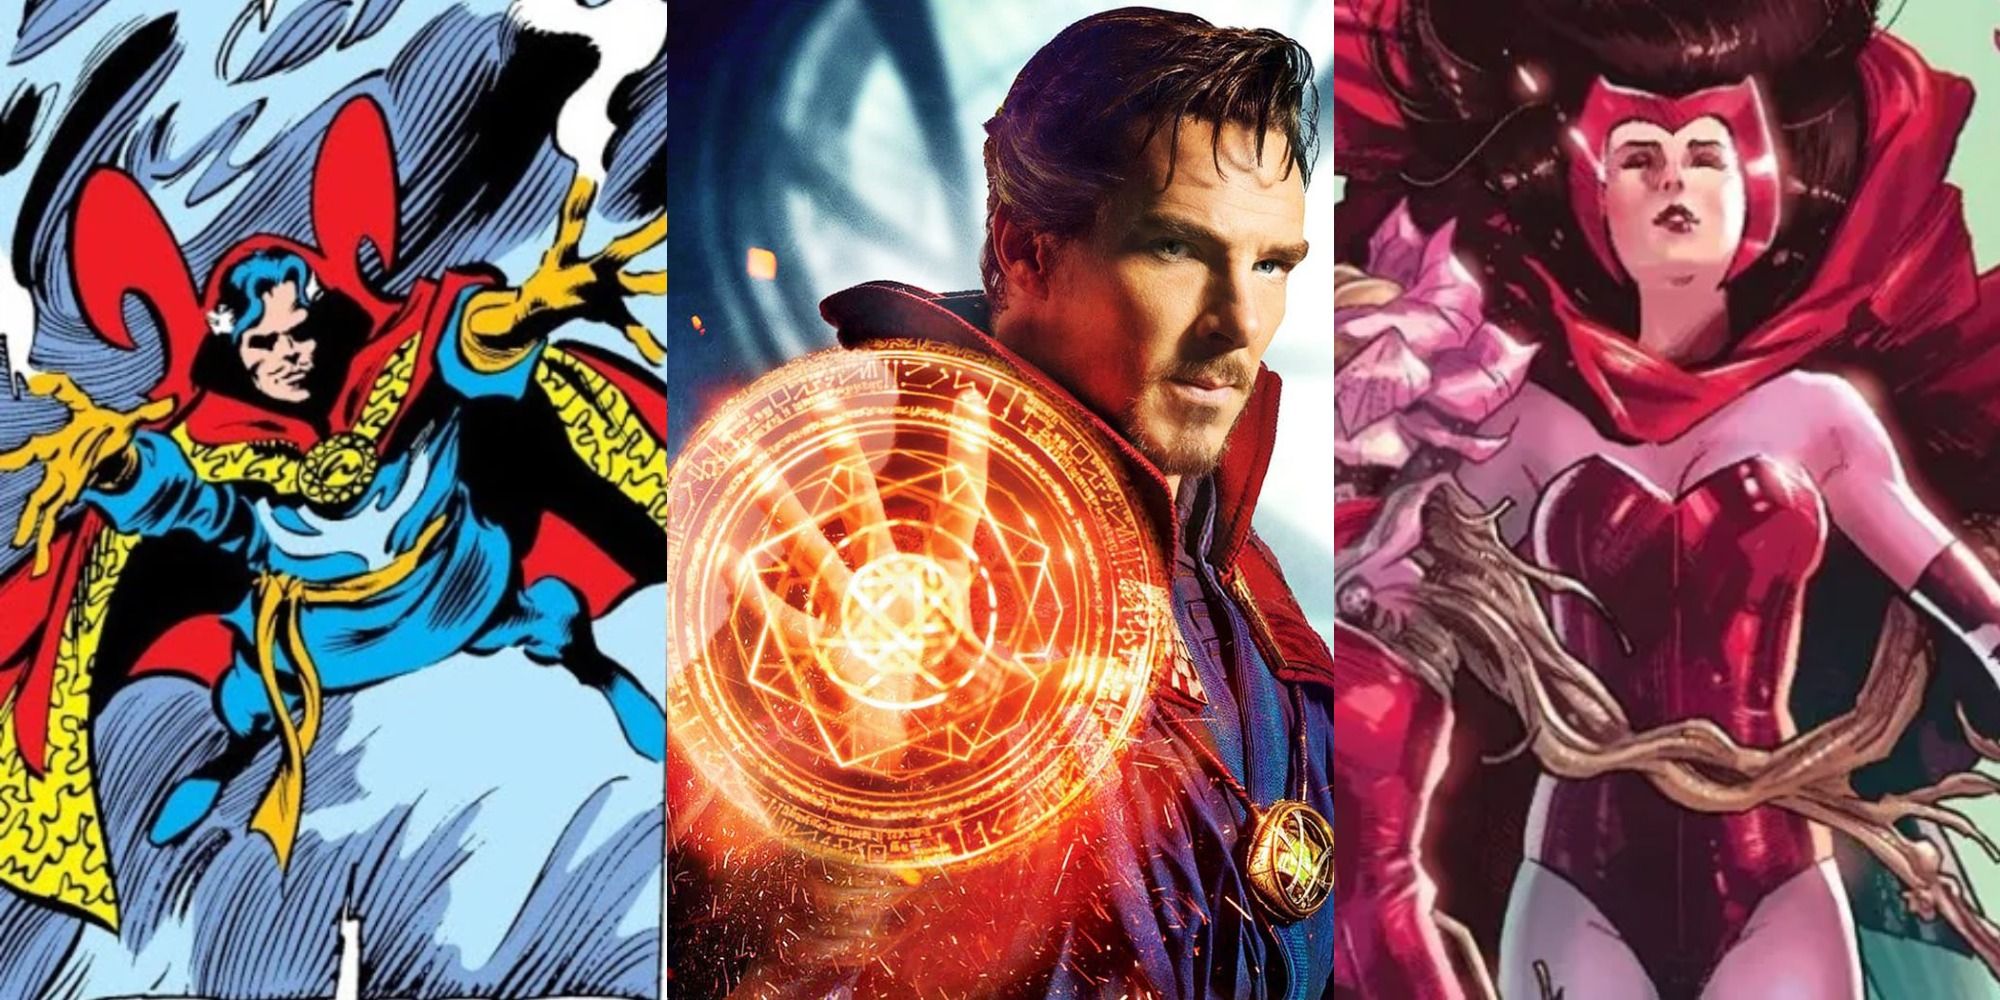 Split image of Doctor Strange and Scarlet Witch casting spells in Marvel Comics and Doctor Strange using his powers in the MCU.